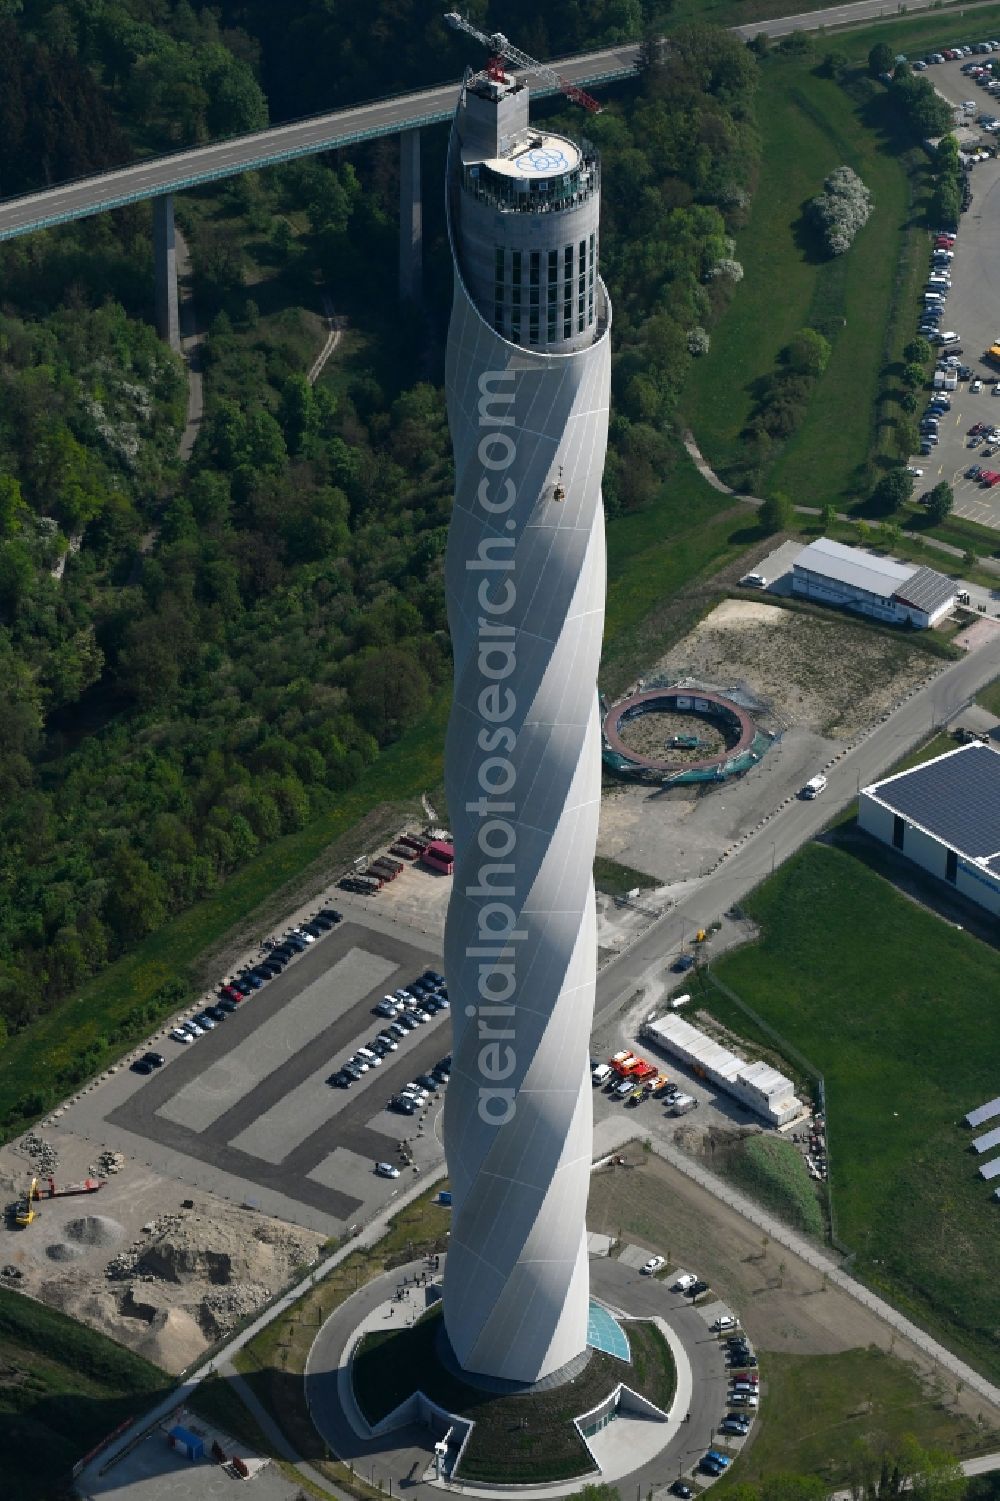 Rottweil from the bird's eye view: Site of the ThyssenKrupp testing tower for Speed elevators in Rottweil in Baden - Wuerttemberg. When finished the new landmark of the town of Rottweil will be the tallest structure in Baden-Wuerttemberg